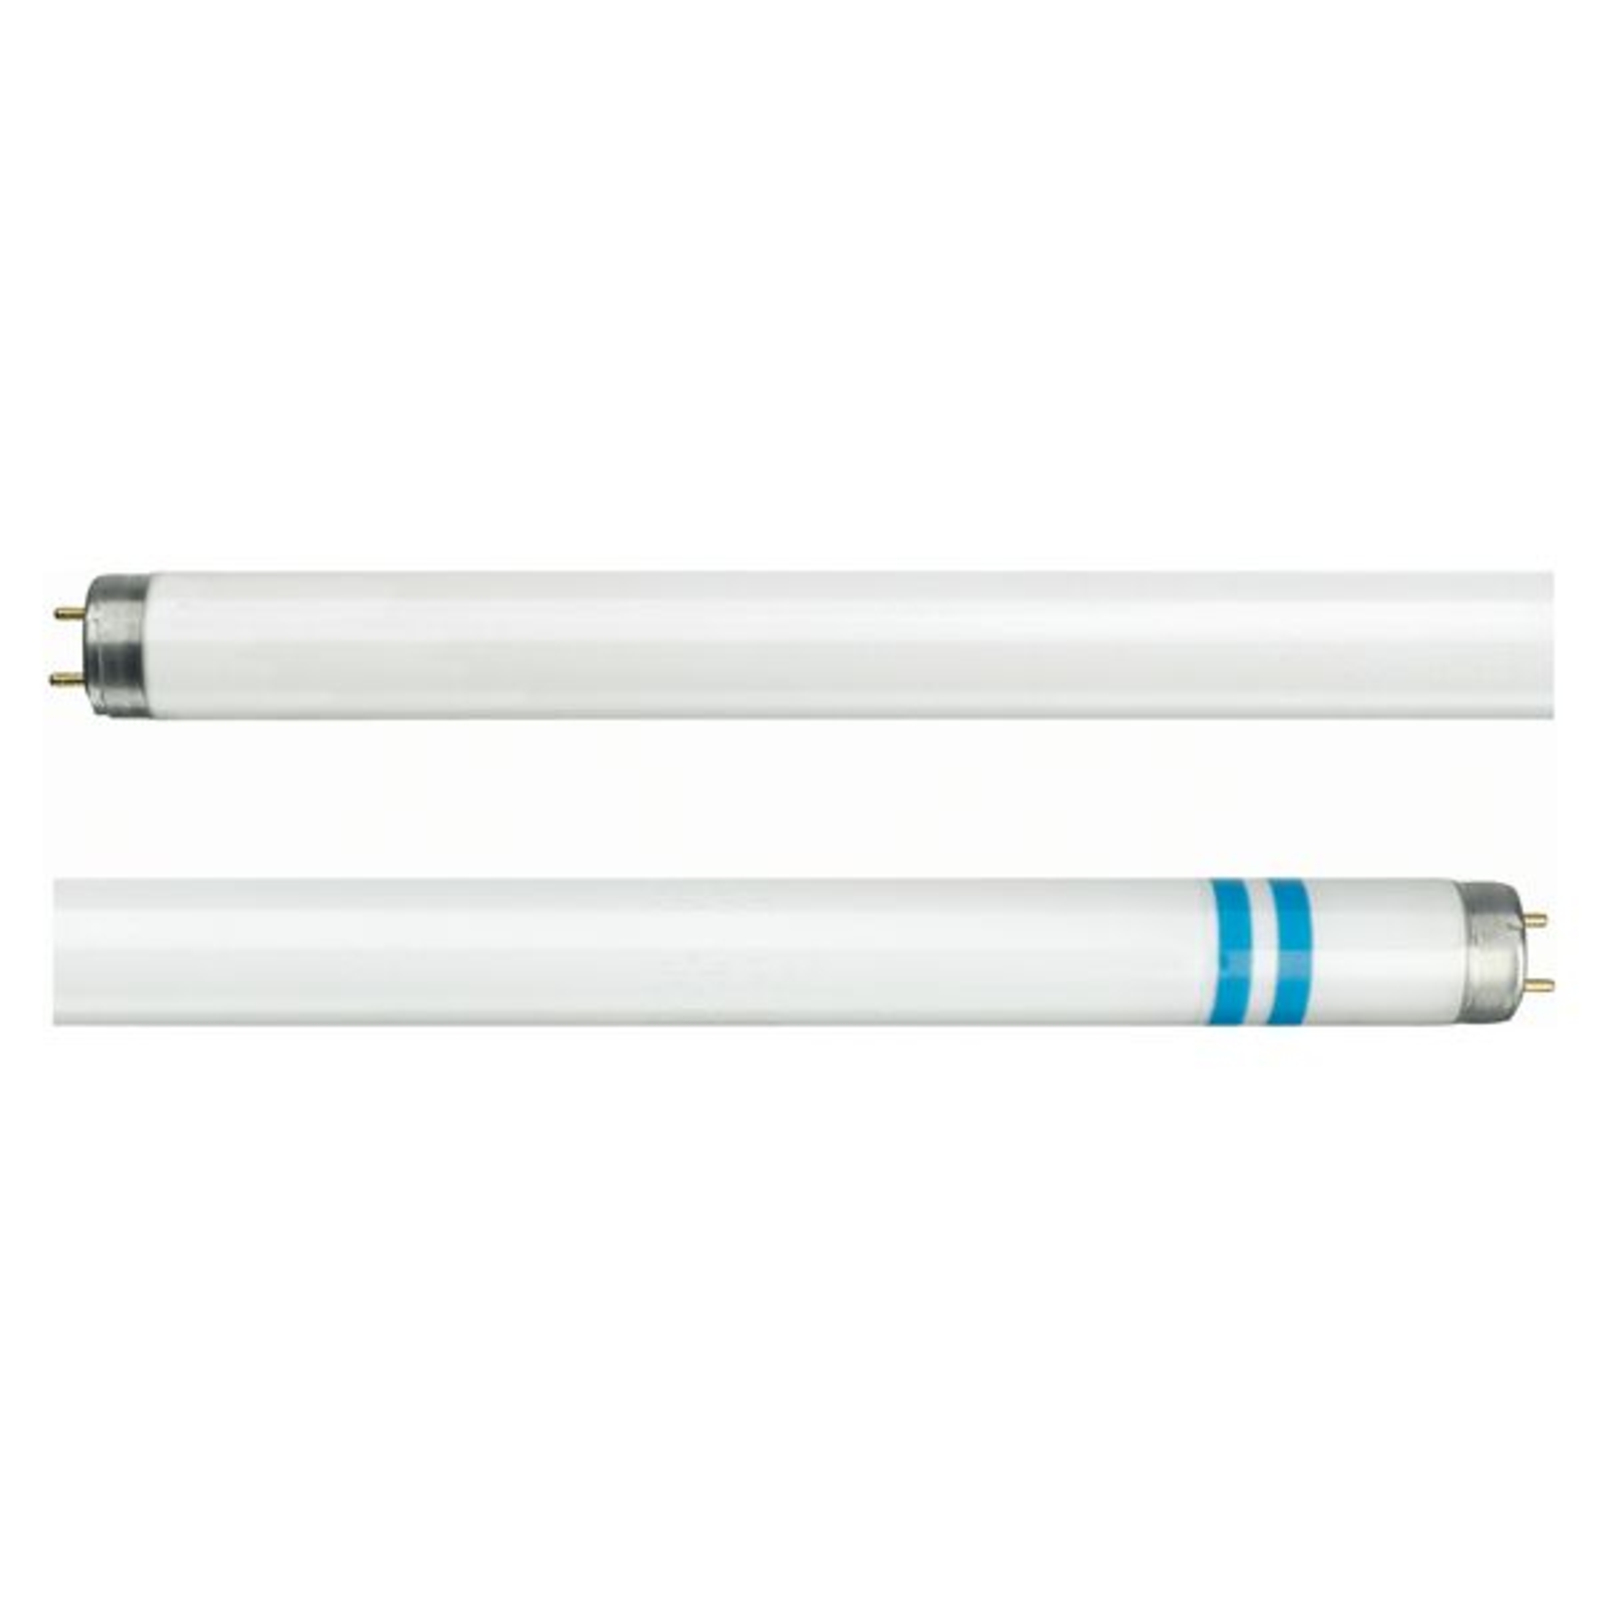 Philips G13 T8 tub fluorescent 840 3200lm 18W